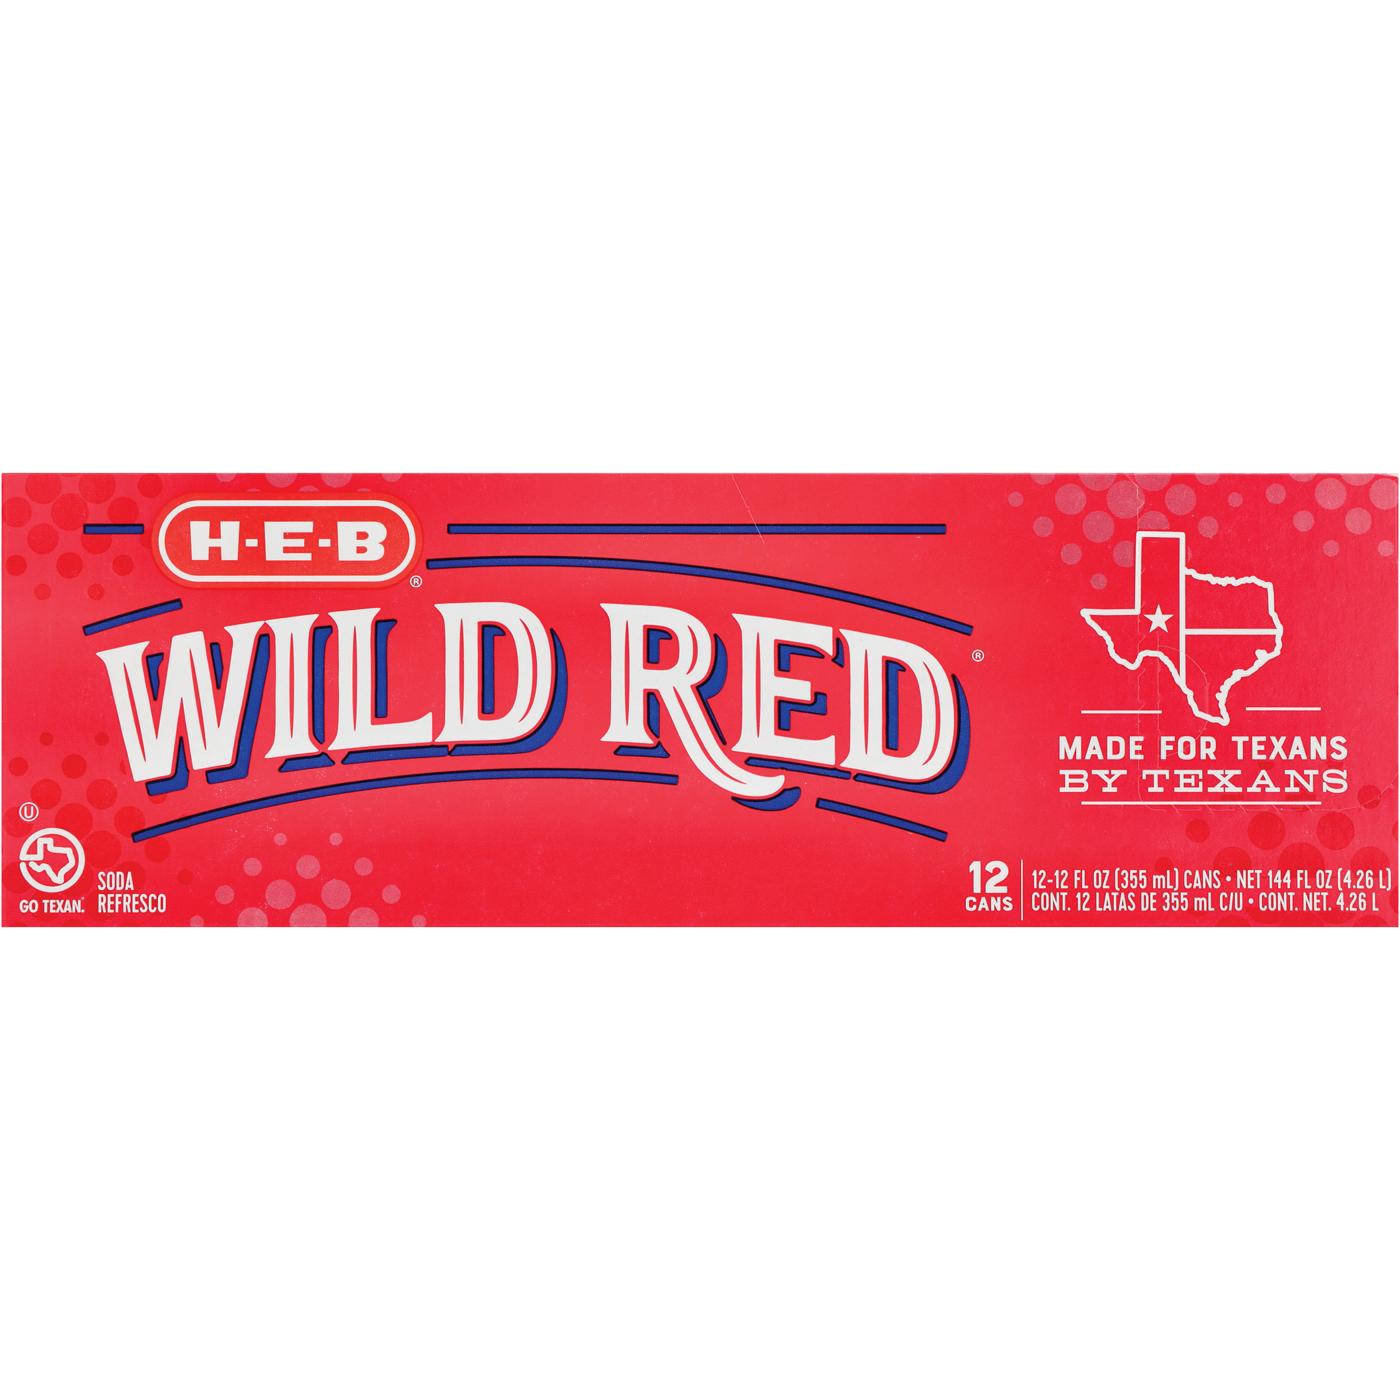 H-E-B Wild Red Soda 12 pk Cans; image 1 of 2